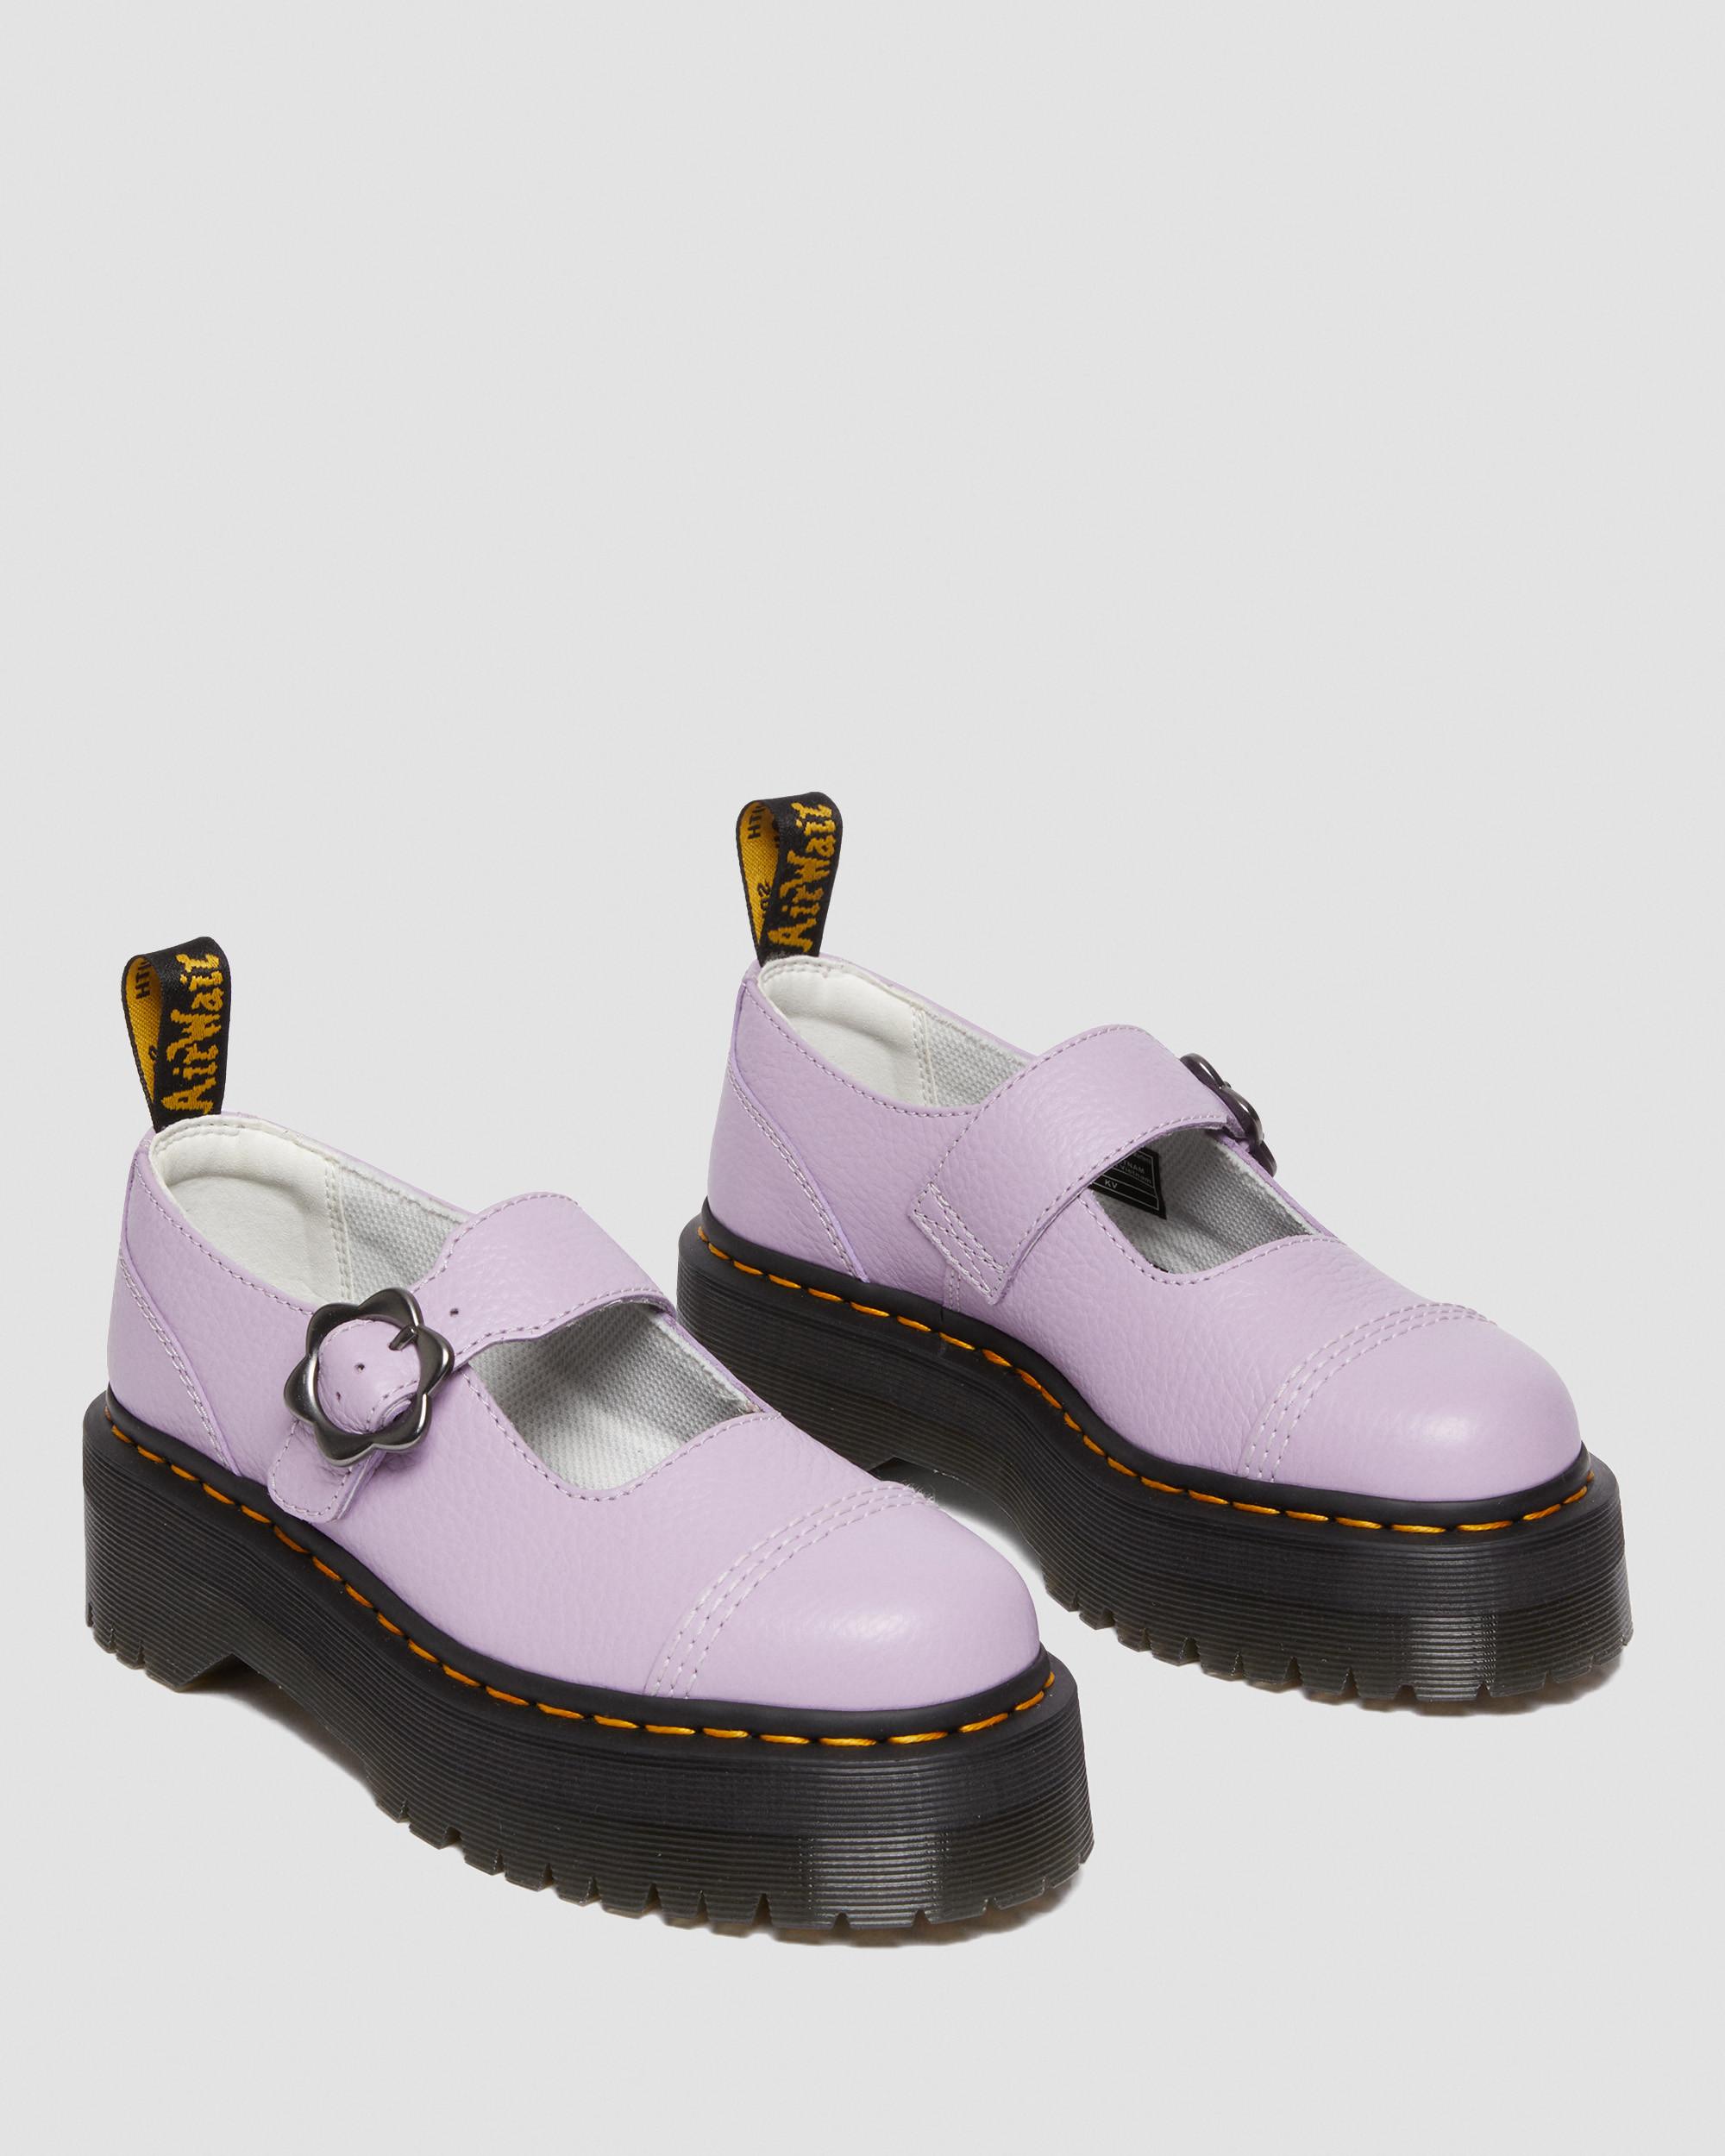 Addina Flower Buckle Leather Platform Shoes in Lilac